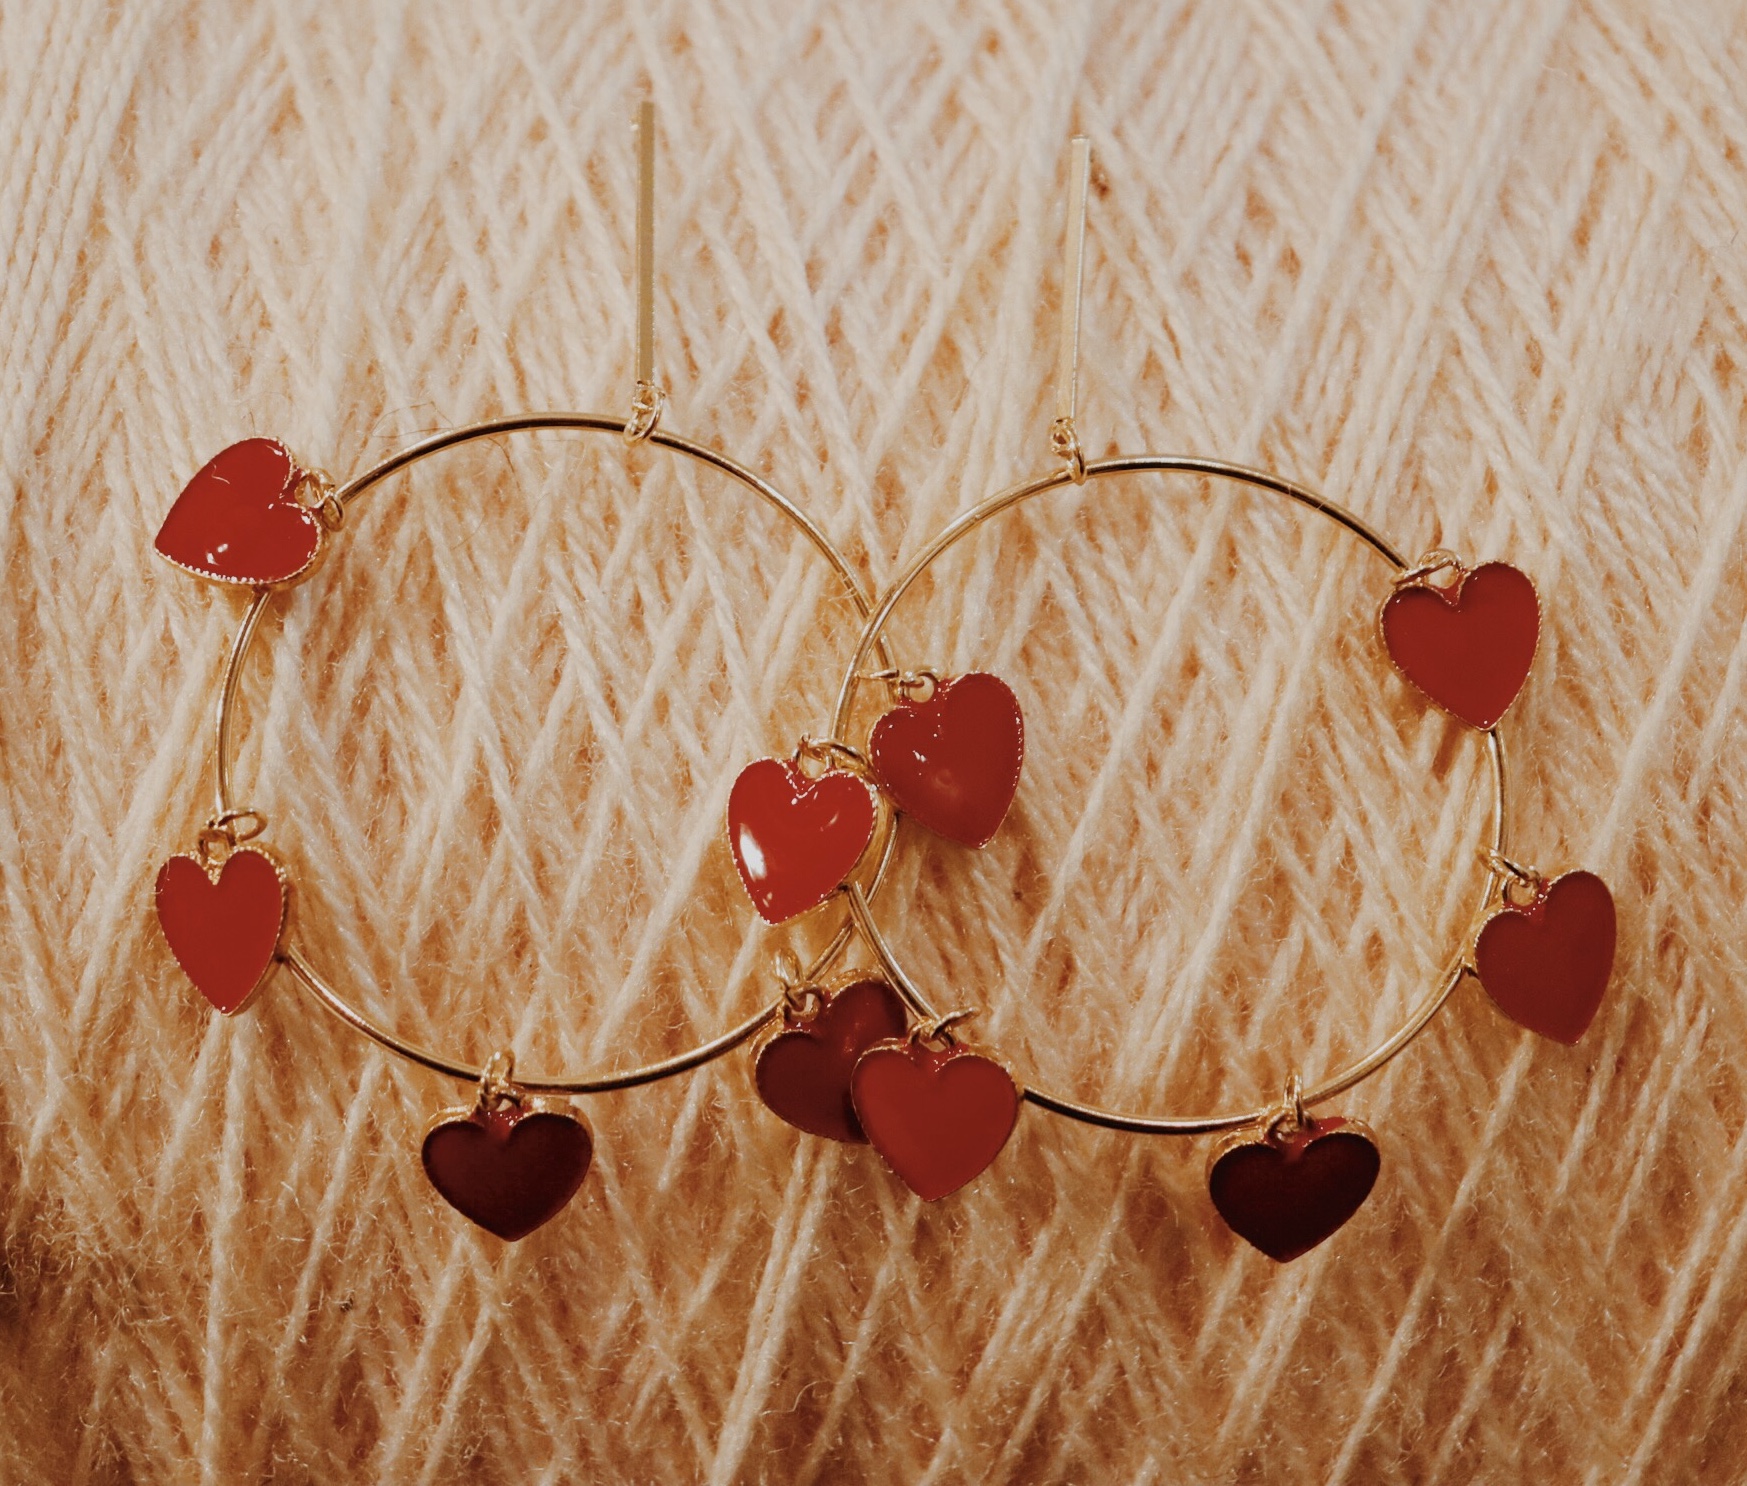 These unique heart earrings are perfect for Valentine's Day or any time of year! They measure 3.5 inches long.